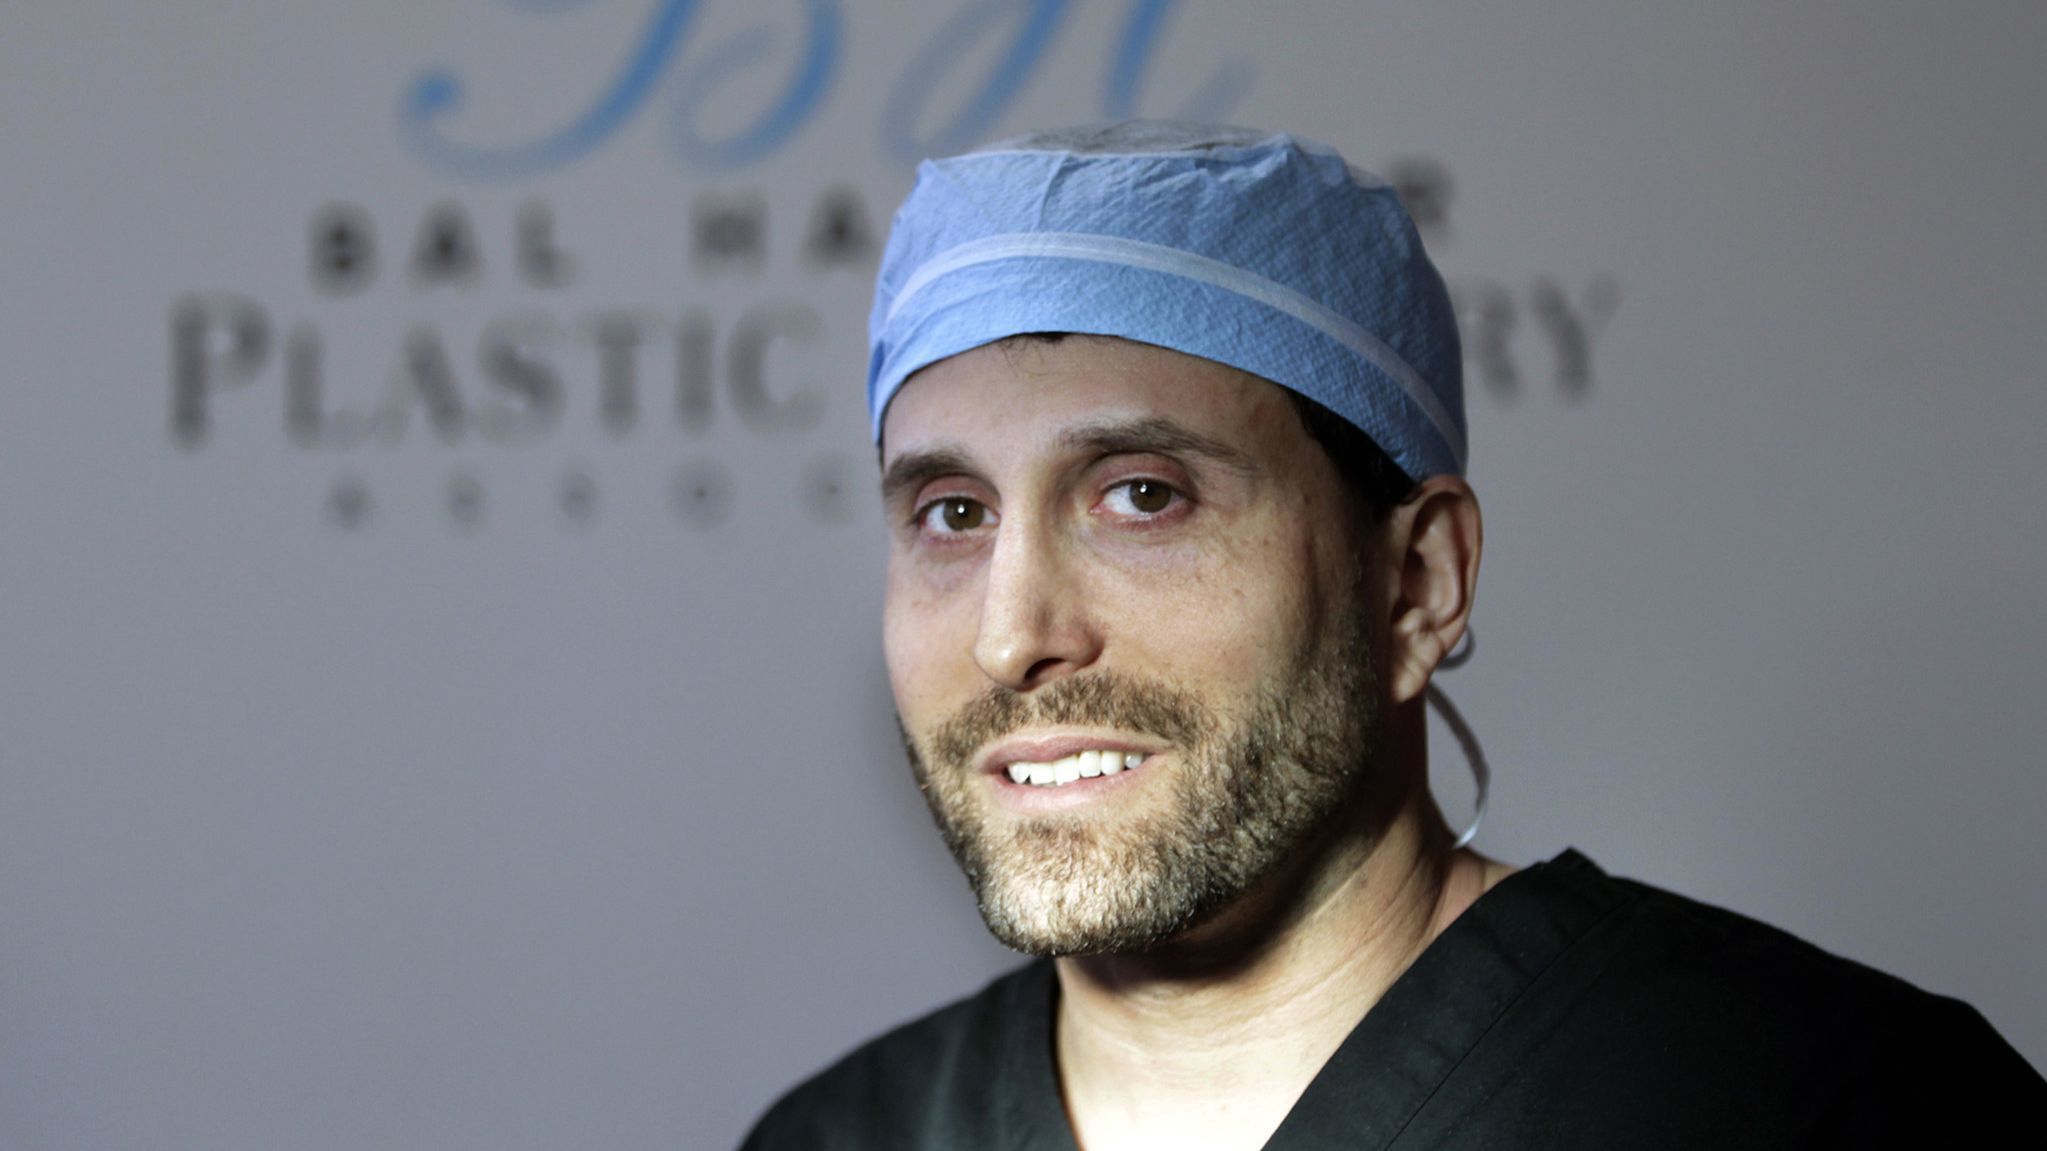 Dr. Miami Biography, Net Worth, Age, Height, Weight, Girlfriend, Family